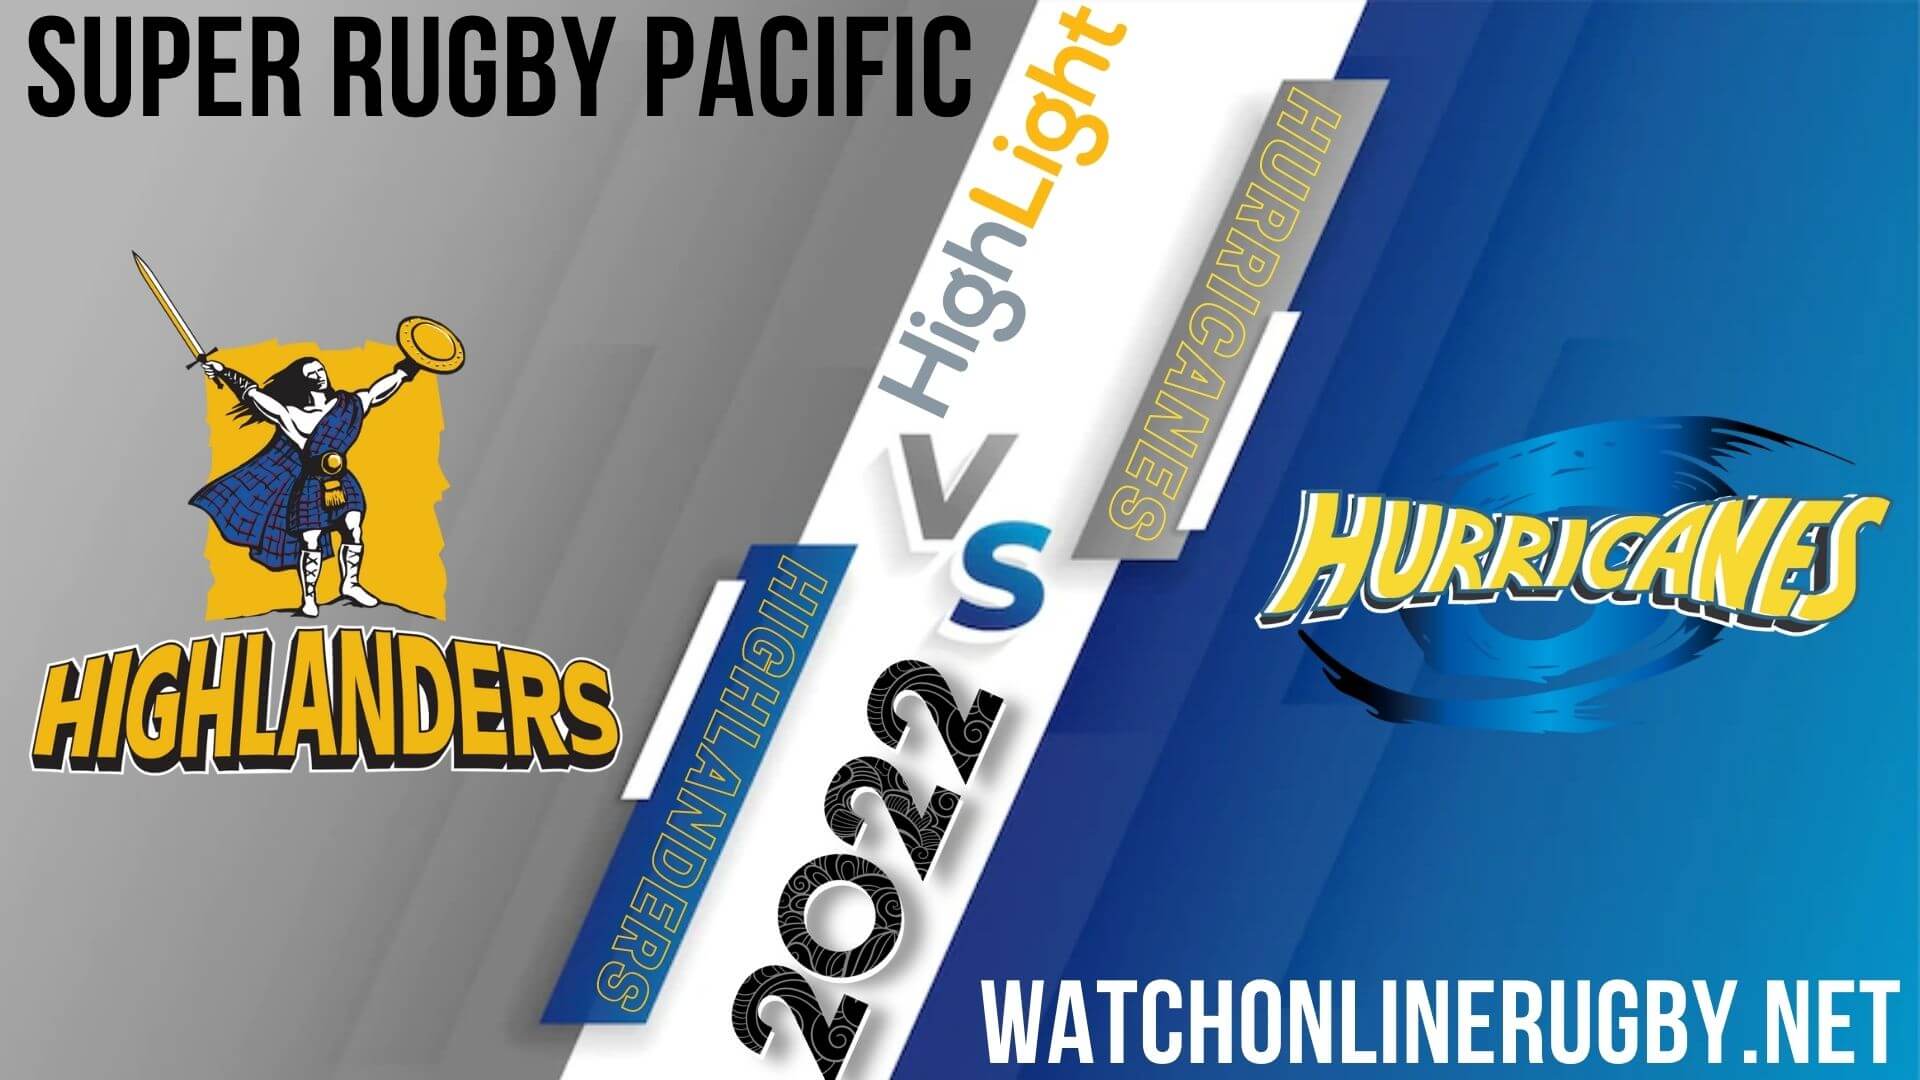 Highlanders Vs Hurricanes Super Rugby Pacific 2022 RD 9